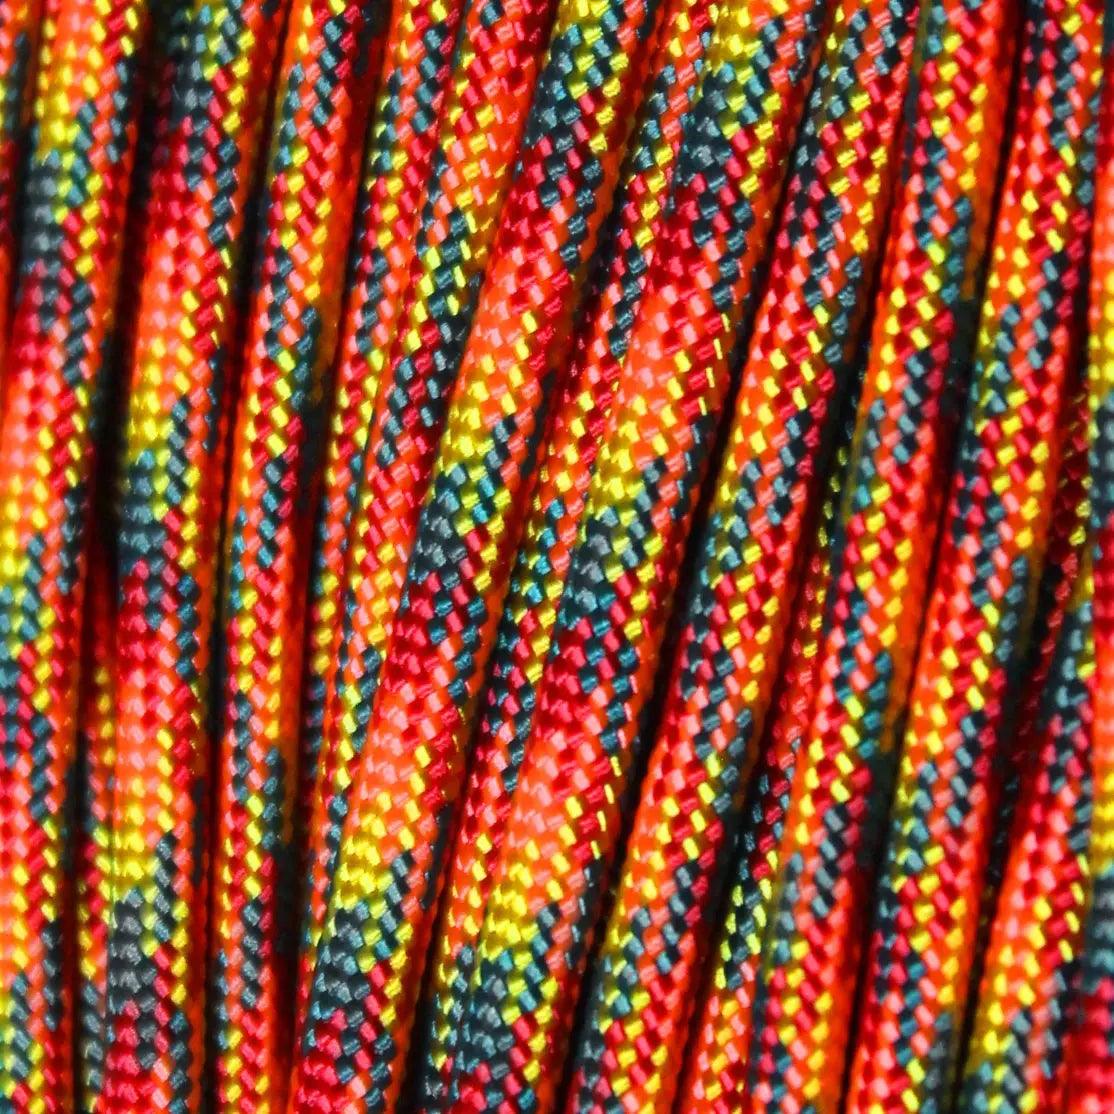 550 Paracord Wild Fire Made in the USA Nylon/Nylon (100 FT.) - Paracord Galaxy